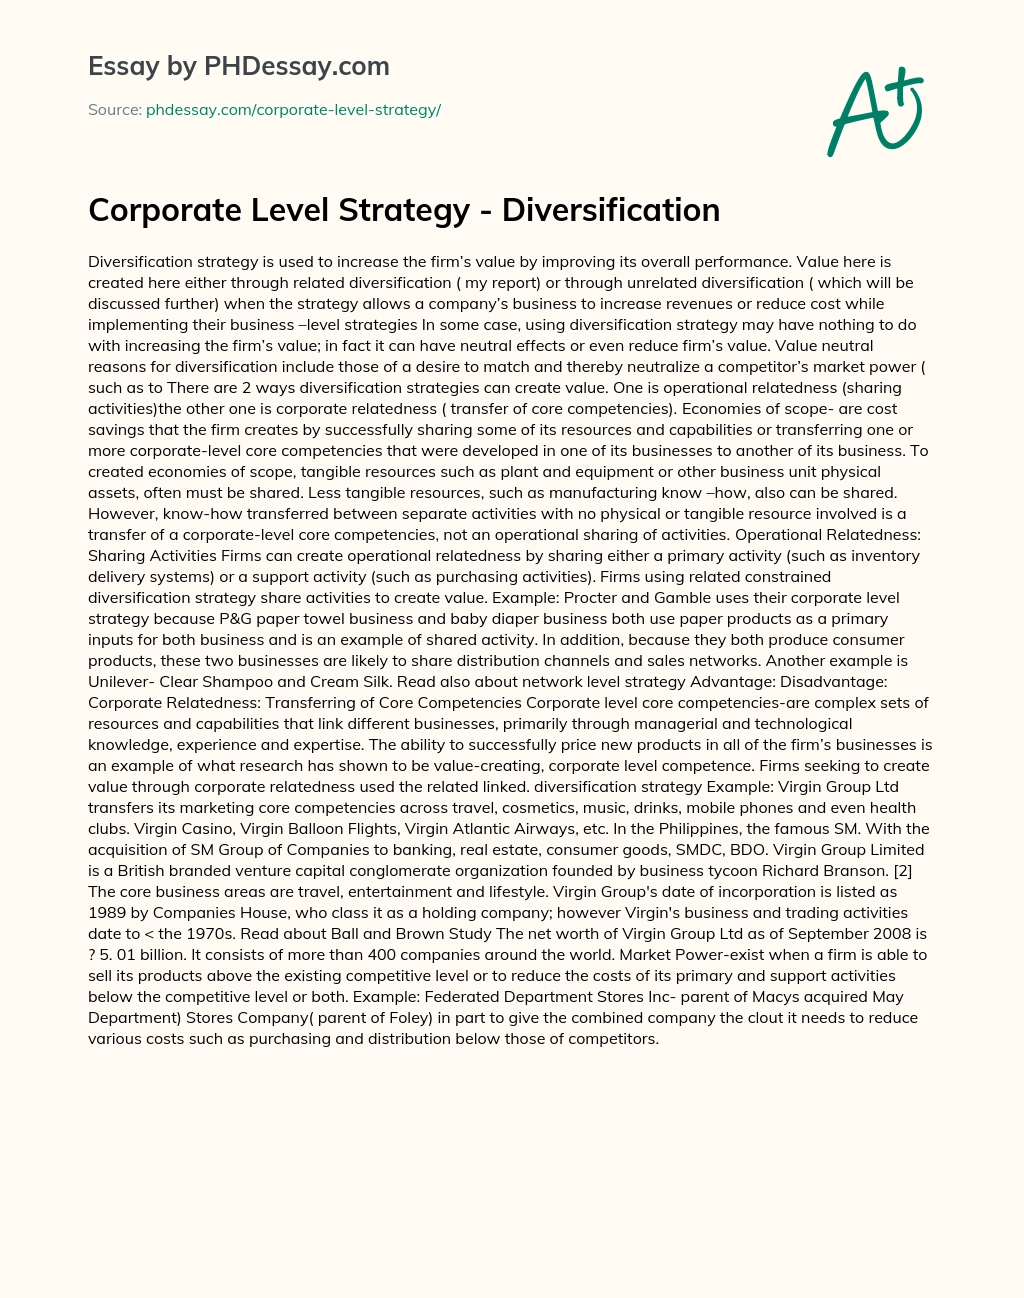 Corporate Level Strategy – Diversification essay